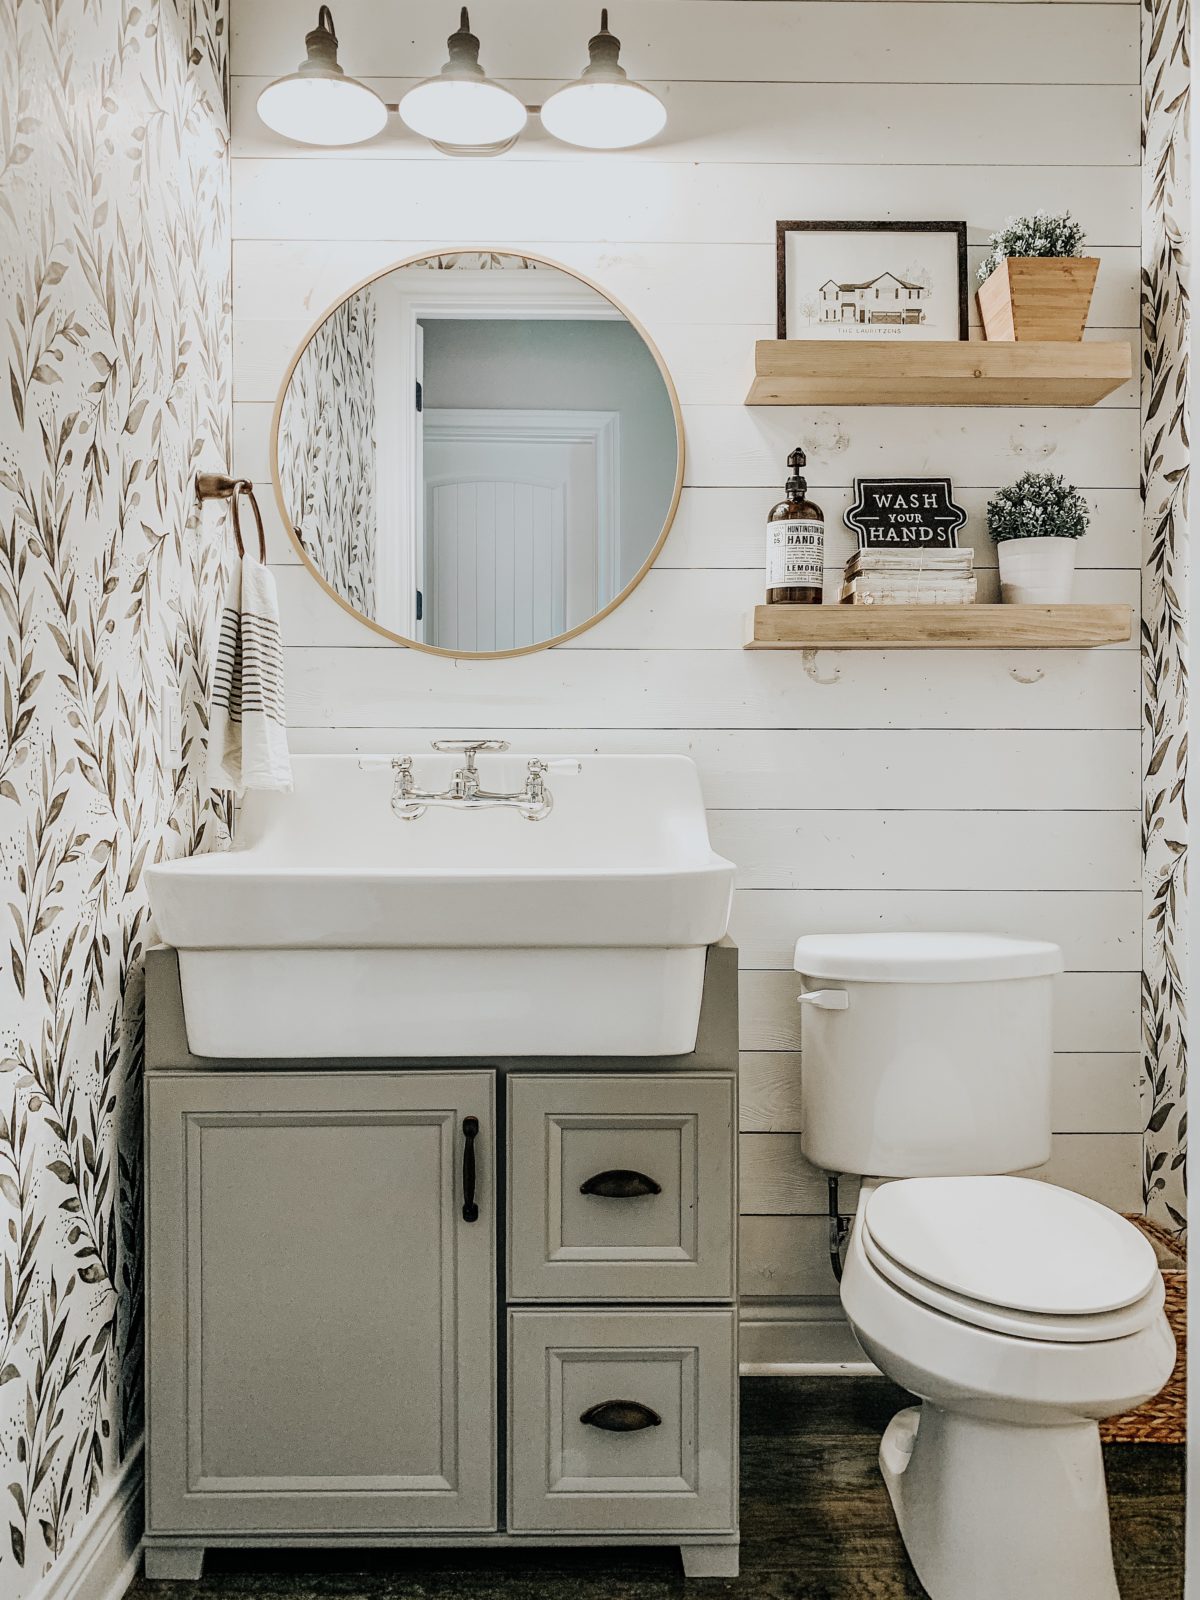 9 Farmhouse Bathrooms We're Obsessed With - City Girl Gone Mom